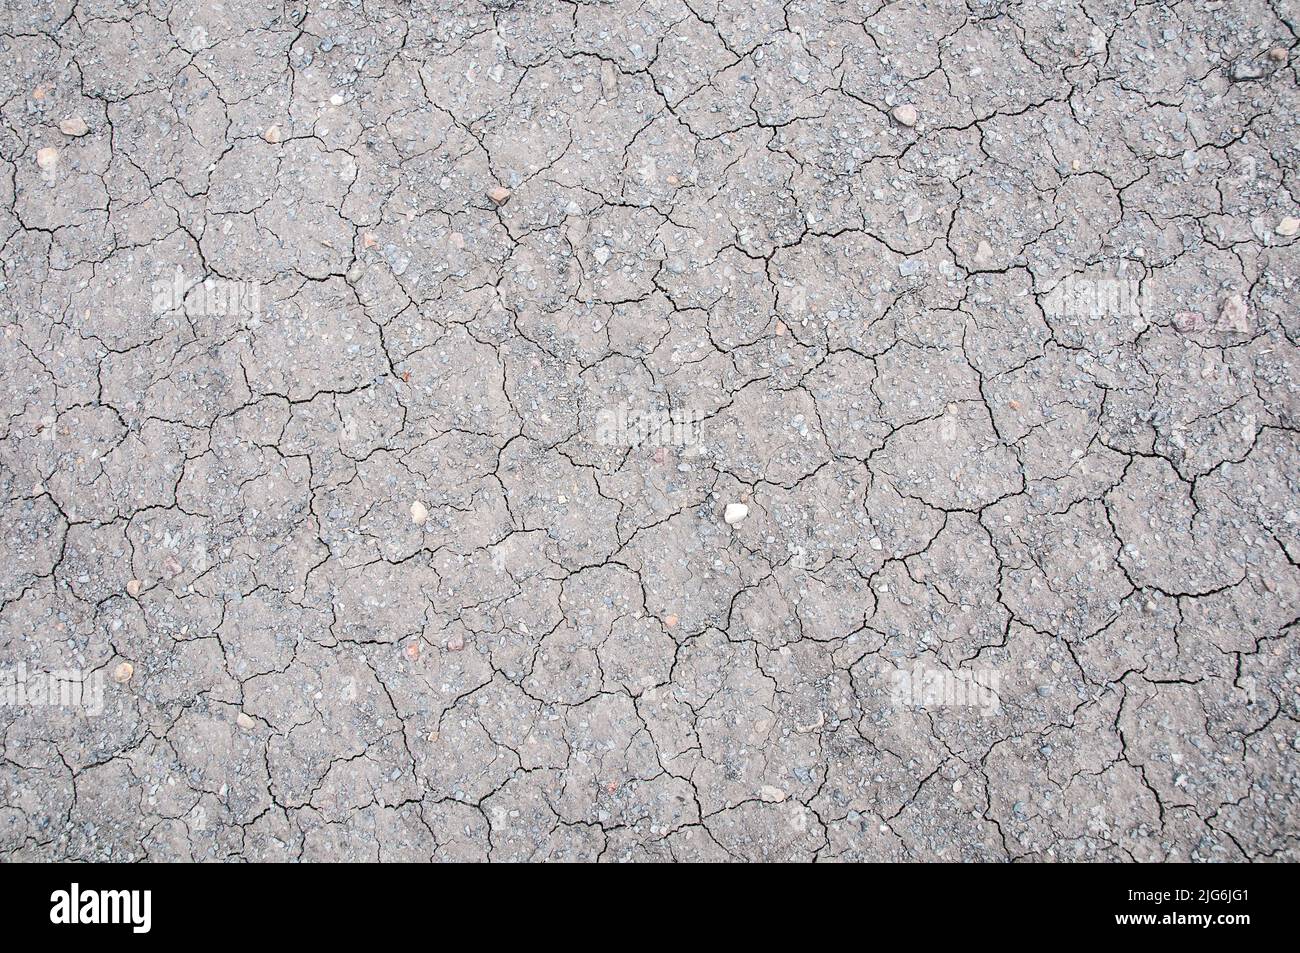 Around the UK - Dry cracked ground creating abstract pattern. Cleveland Way, North Yorkshire Stock Photo